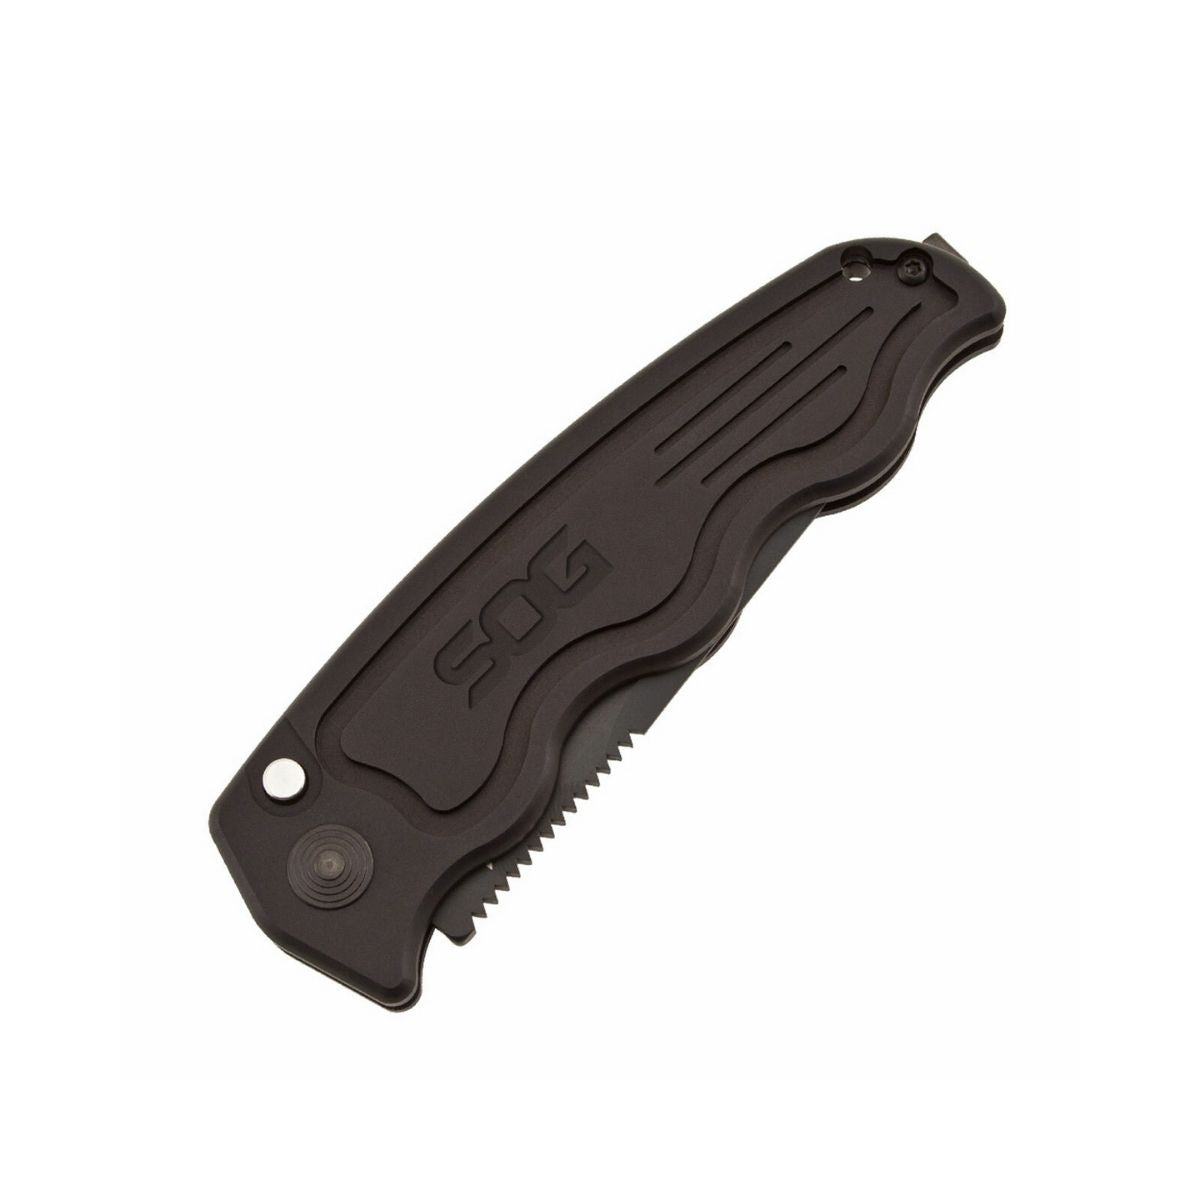 SOG TAC Auto - Tanto - Serrated Knife - ST-04 - Outdoor Travel Gear 5